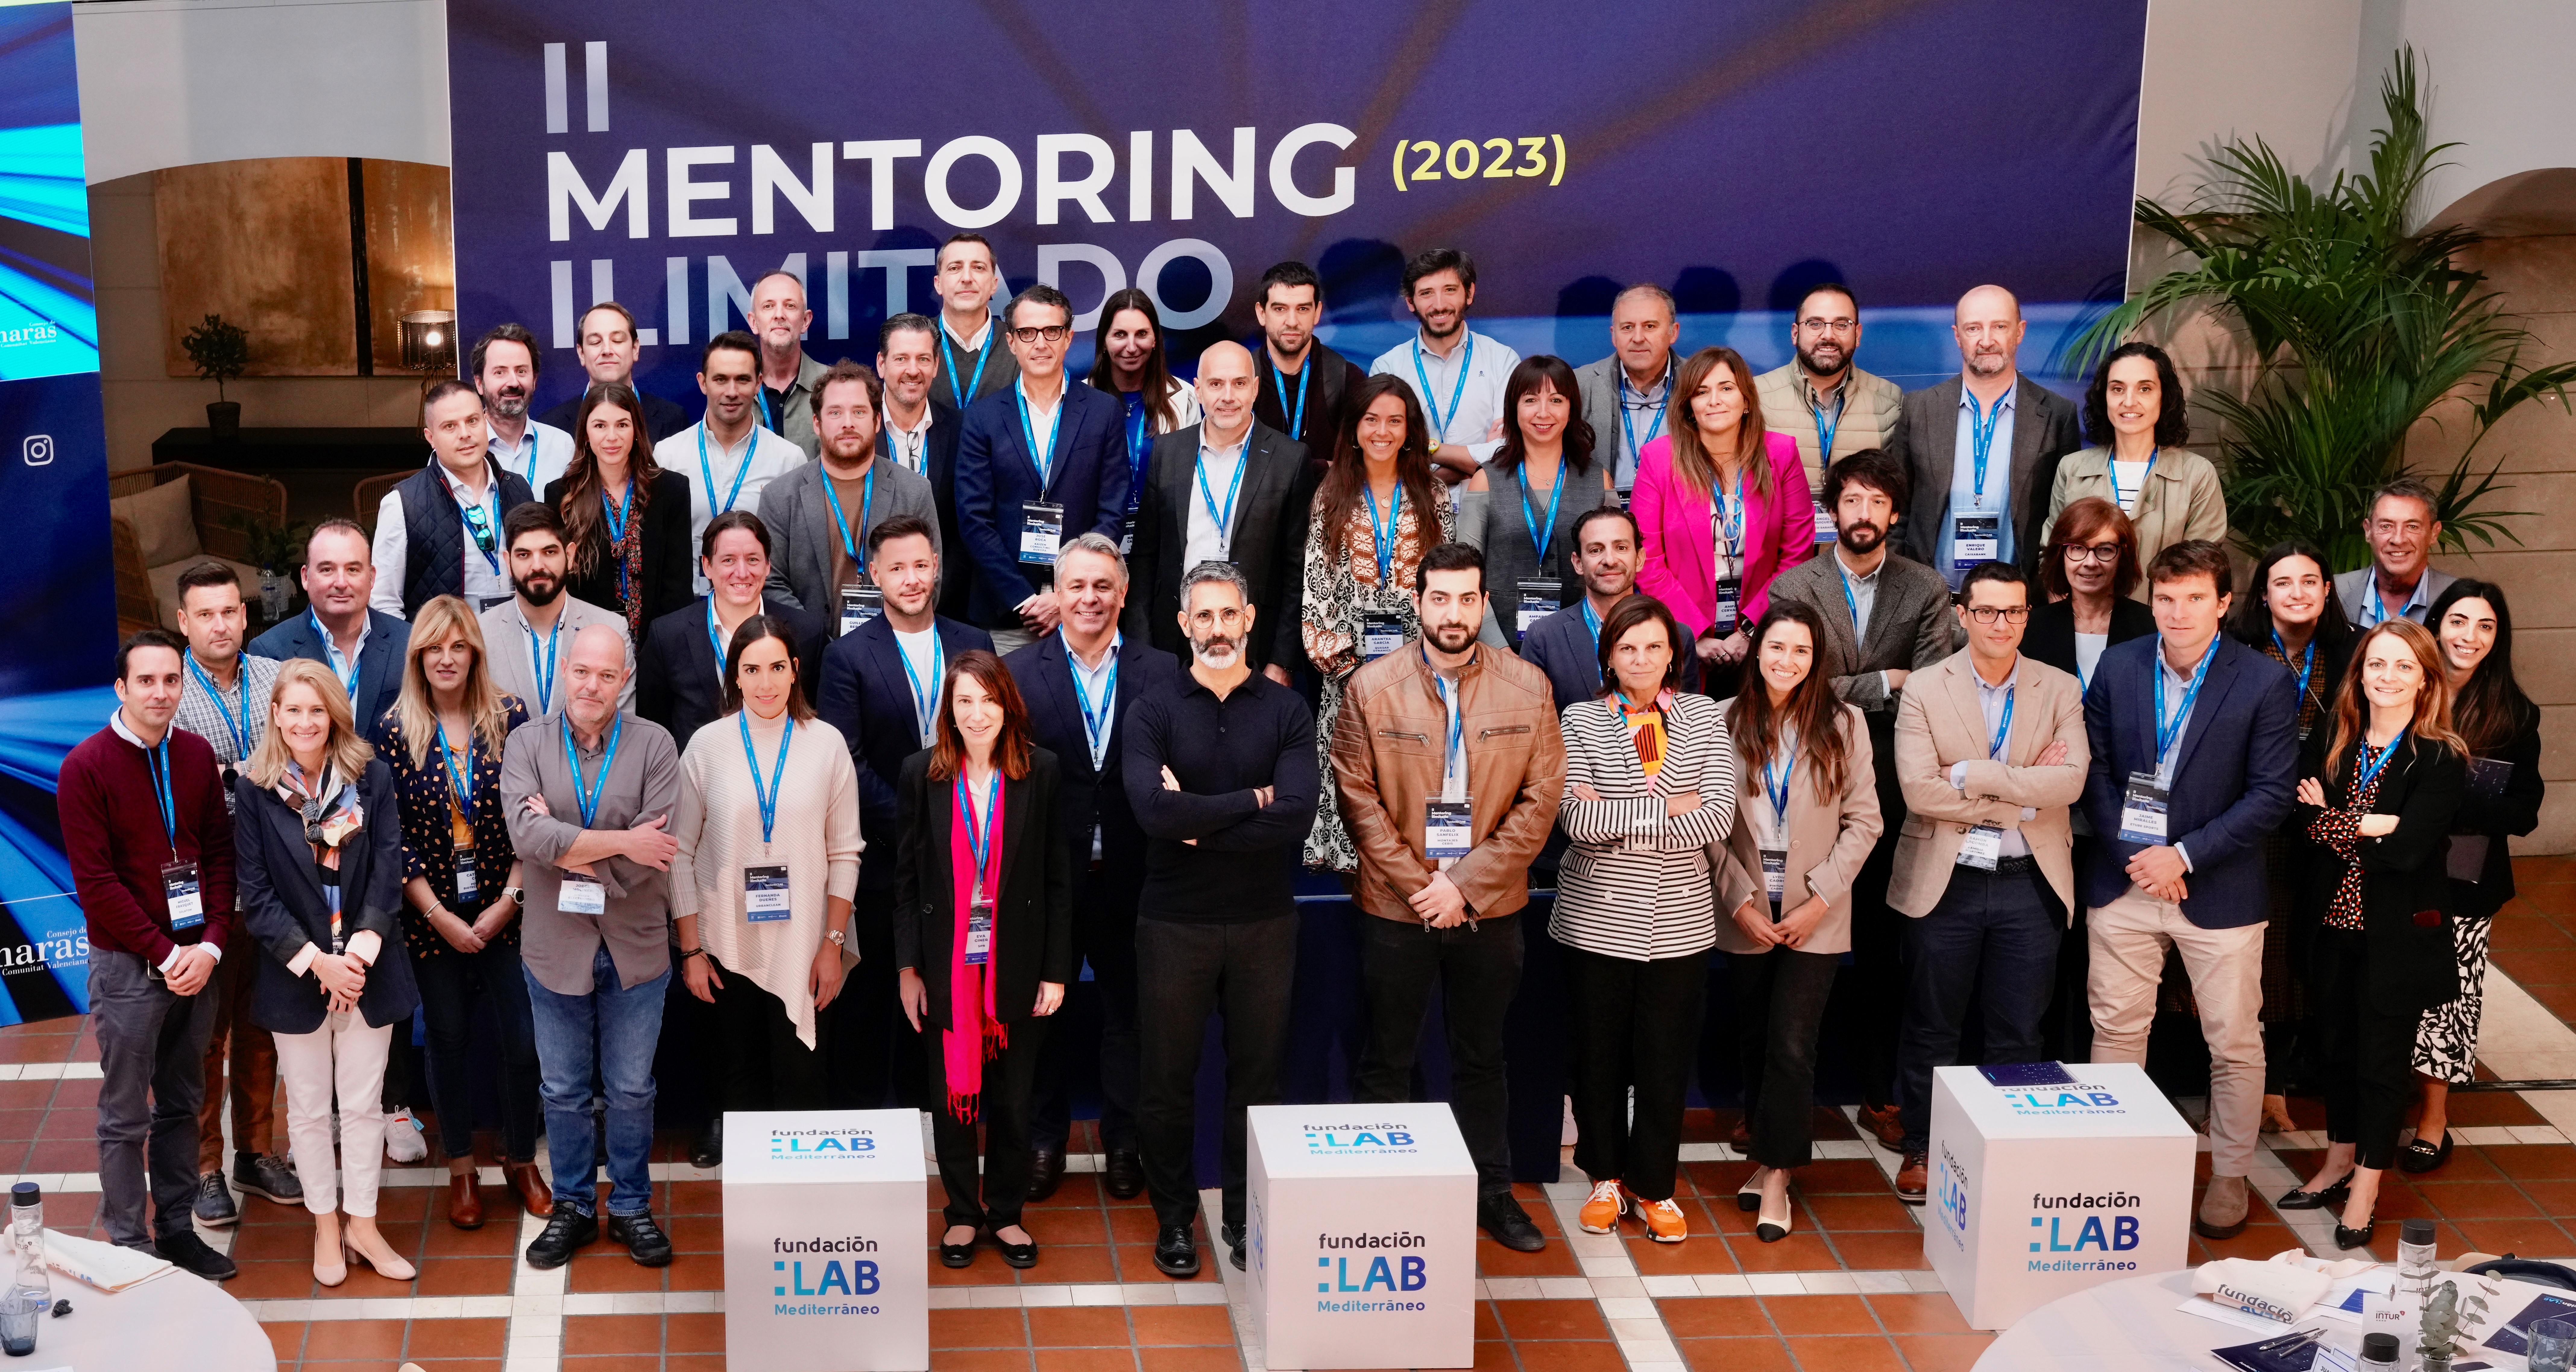 Fundación LAB Mediterráneo holds its “II Unlimited Mentoring” to help SMEs overcome challenges in innovation and technology